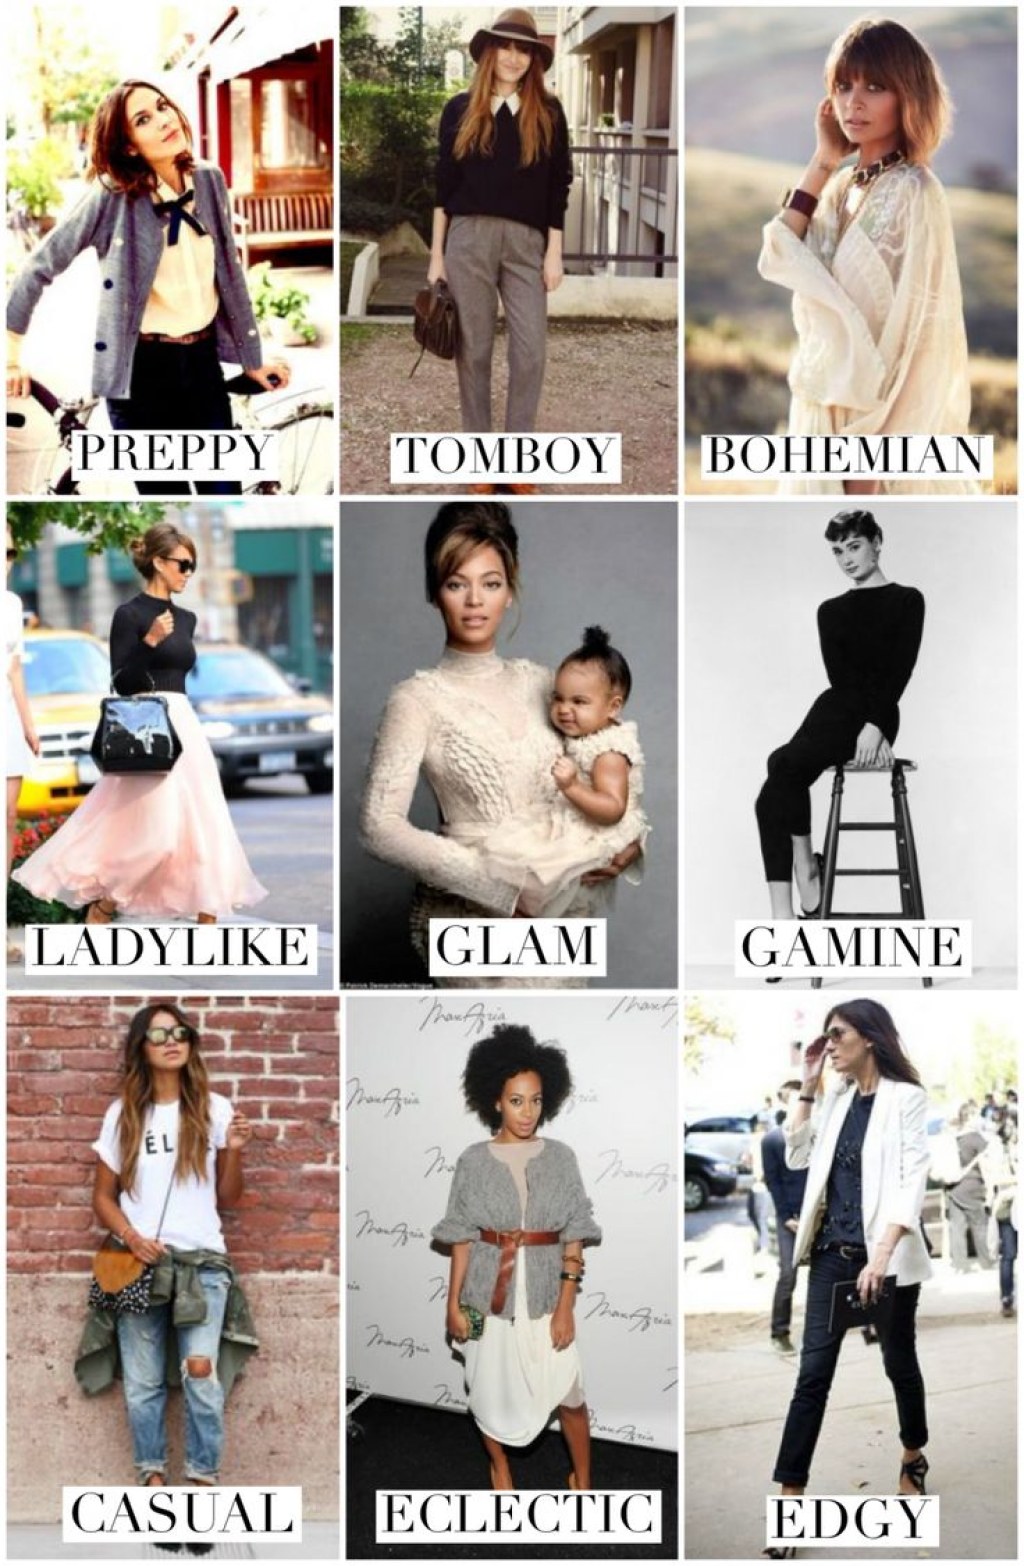 fashion style kinds - Style : How to Define Your Personal Style  Types of fashion